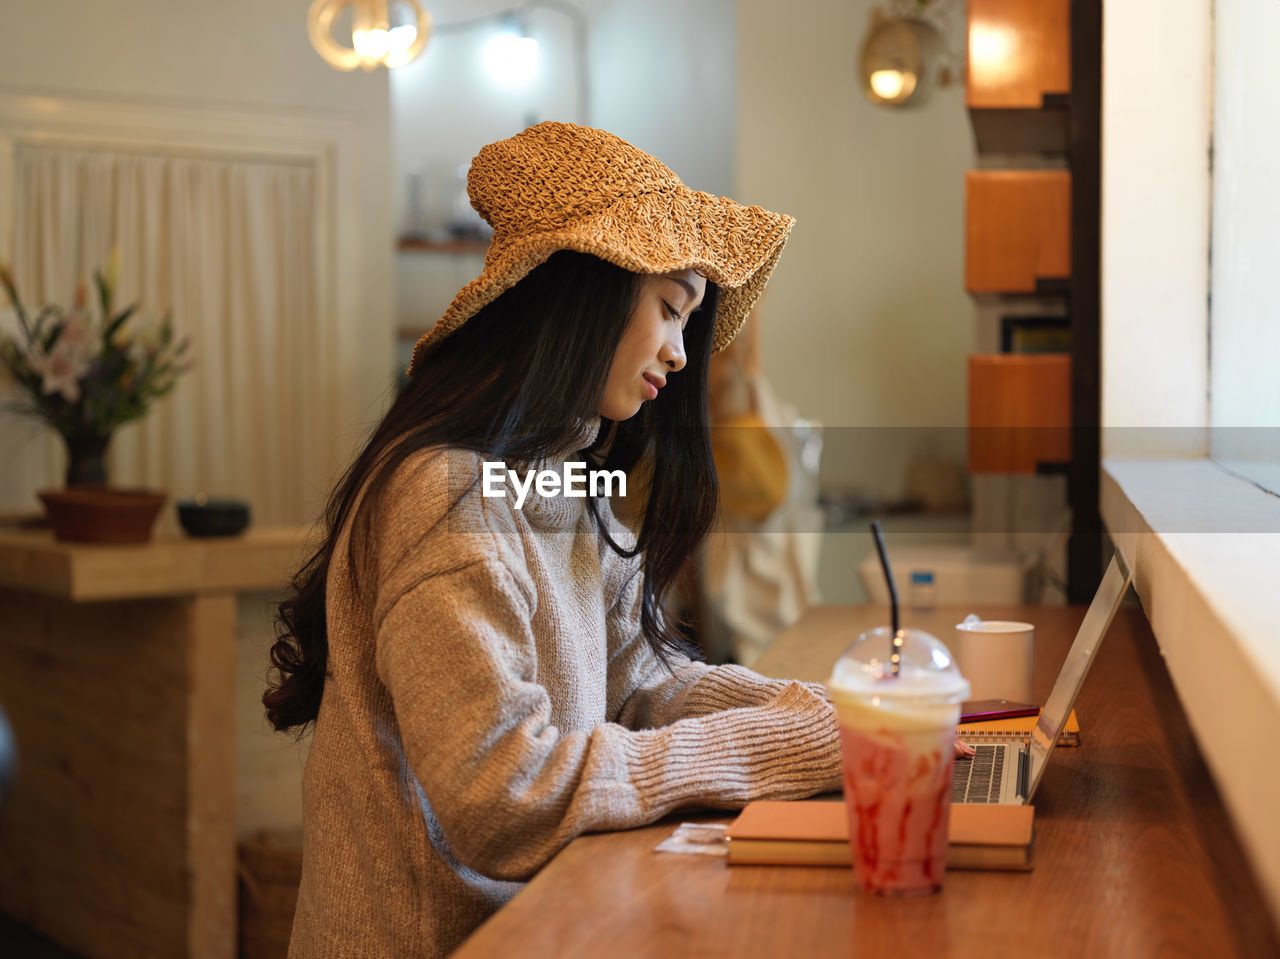 Young woman working on laptop by milkshake at cafe